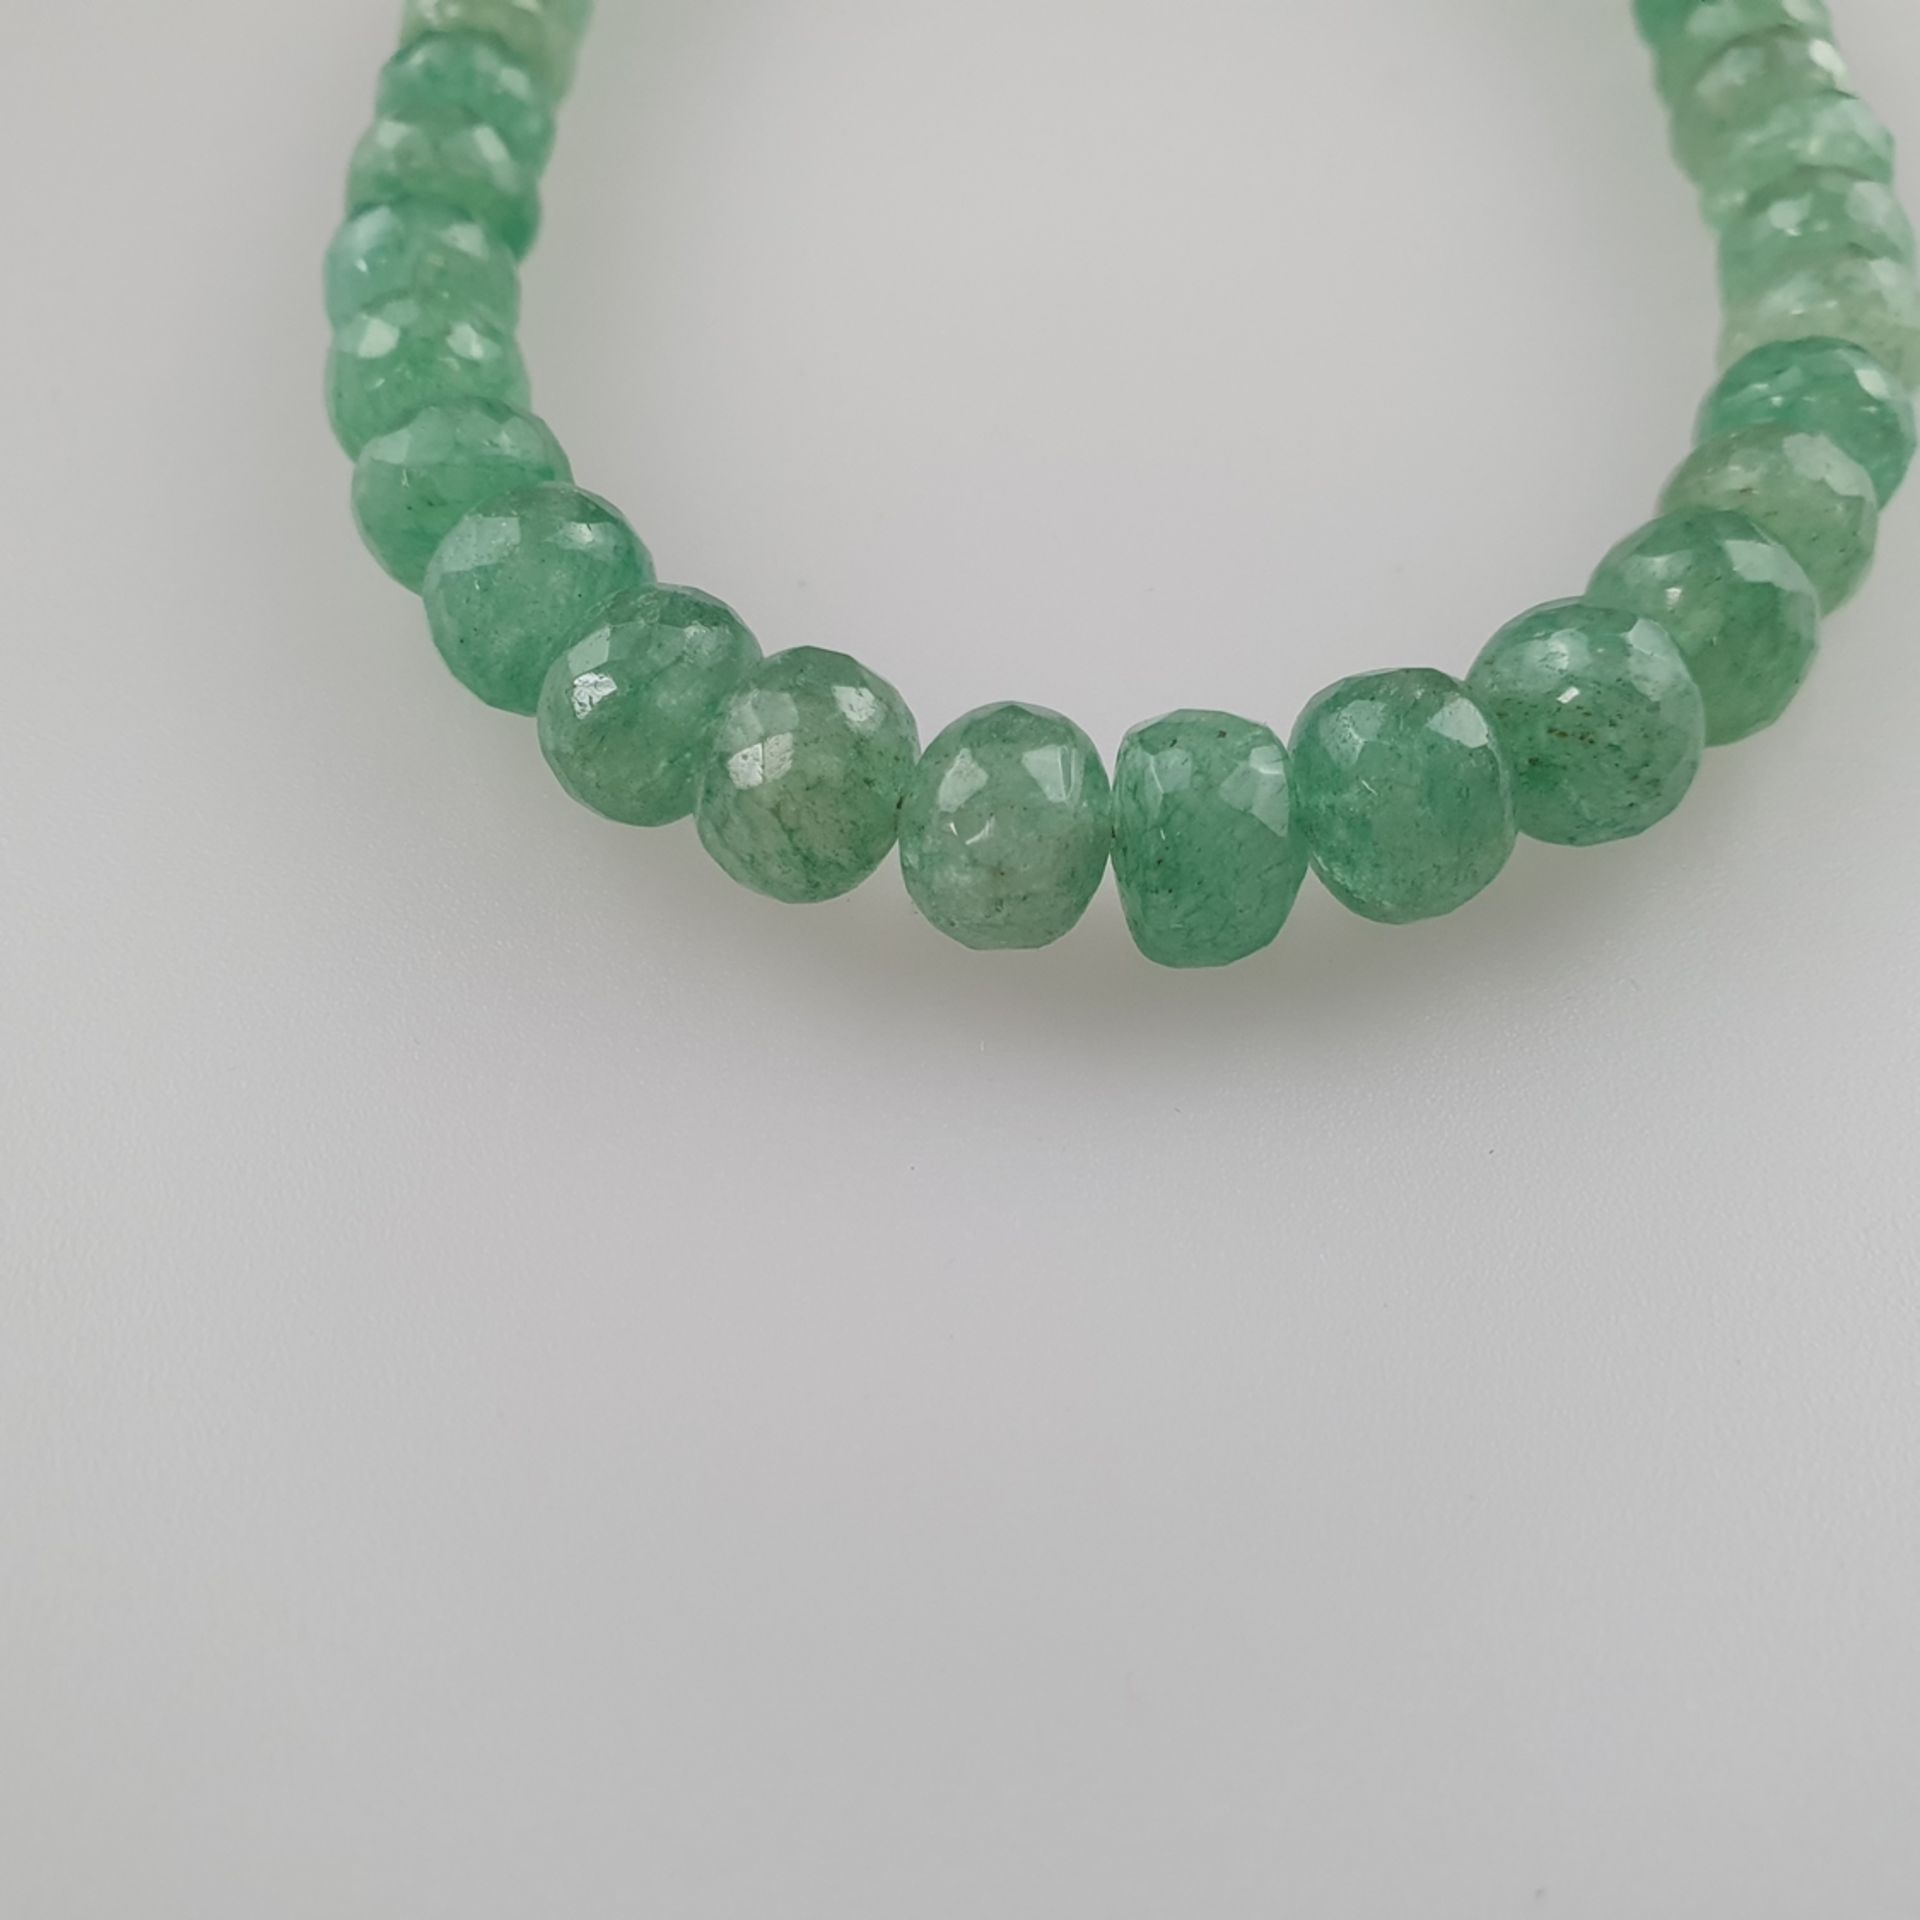 258cts Faceted Beryl Emerald Beads Necklace, L. ca. 45 cm,  ca. 50 Gramm - Image 4 of 6